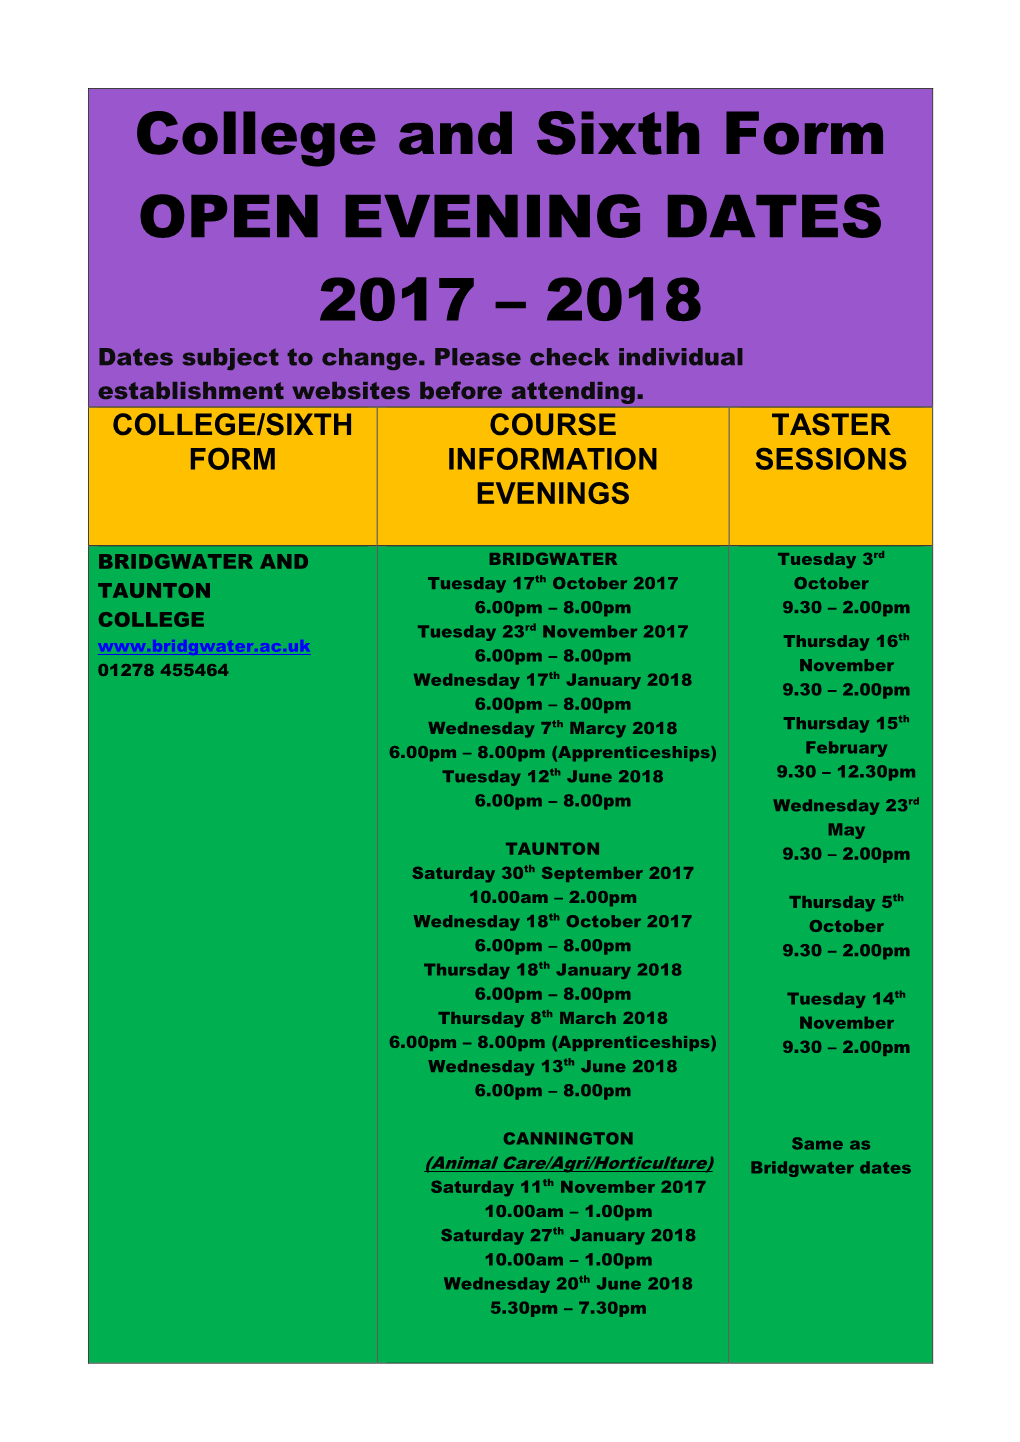 College and Sixth Form OPEN EVENING DATES 2017 – 2018 Dates Subject to Change